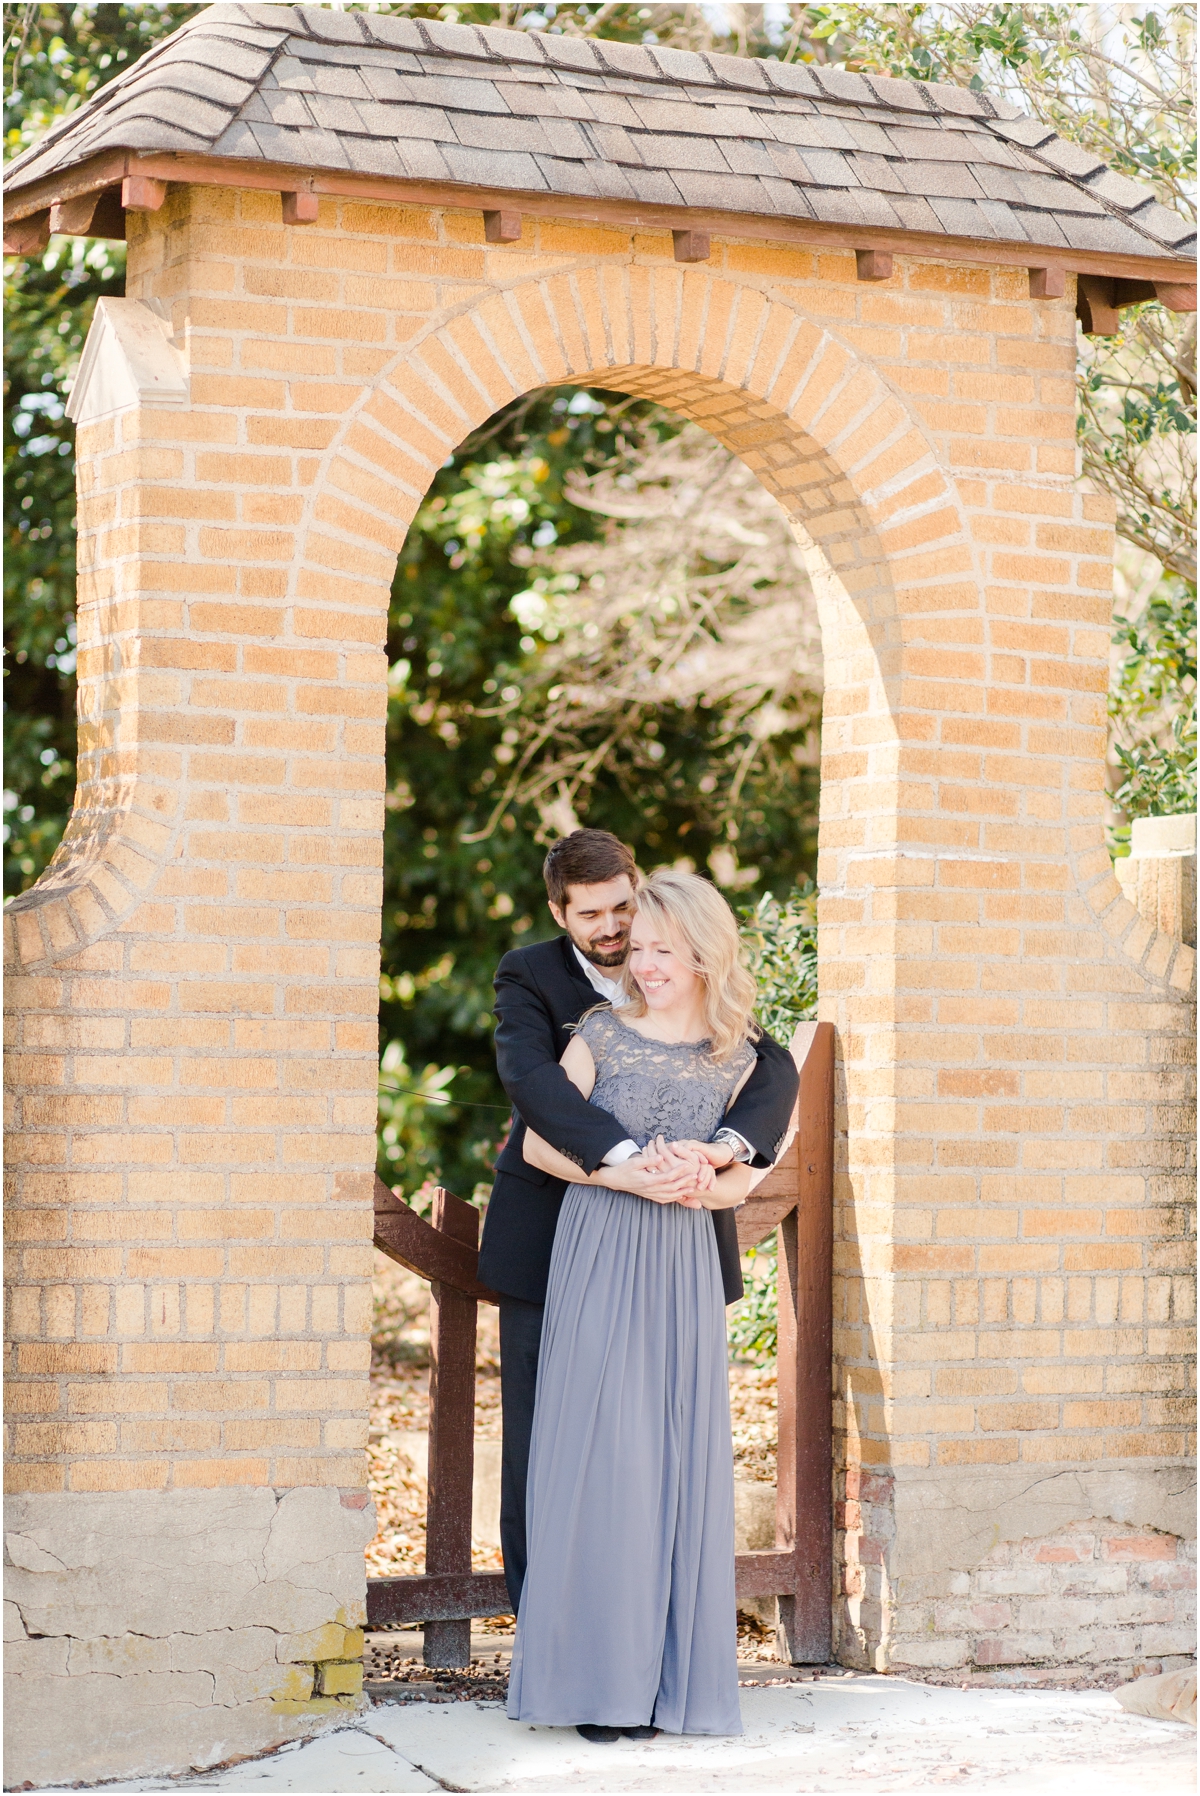 Classy winter engagement session in downtown Greer, SC at the Randall House